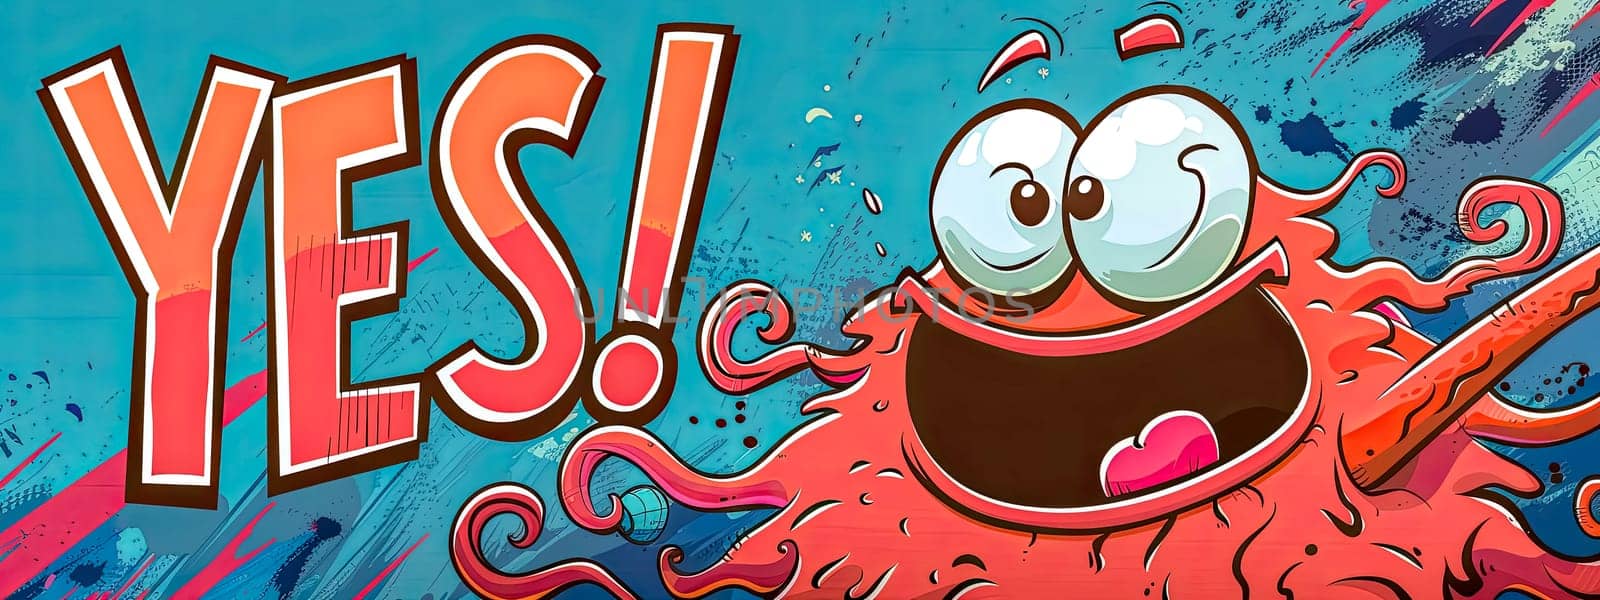 Excited cartoon character with yes! exclamation by Edophoto